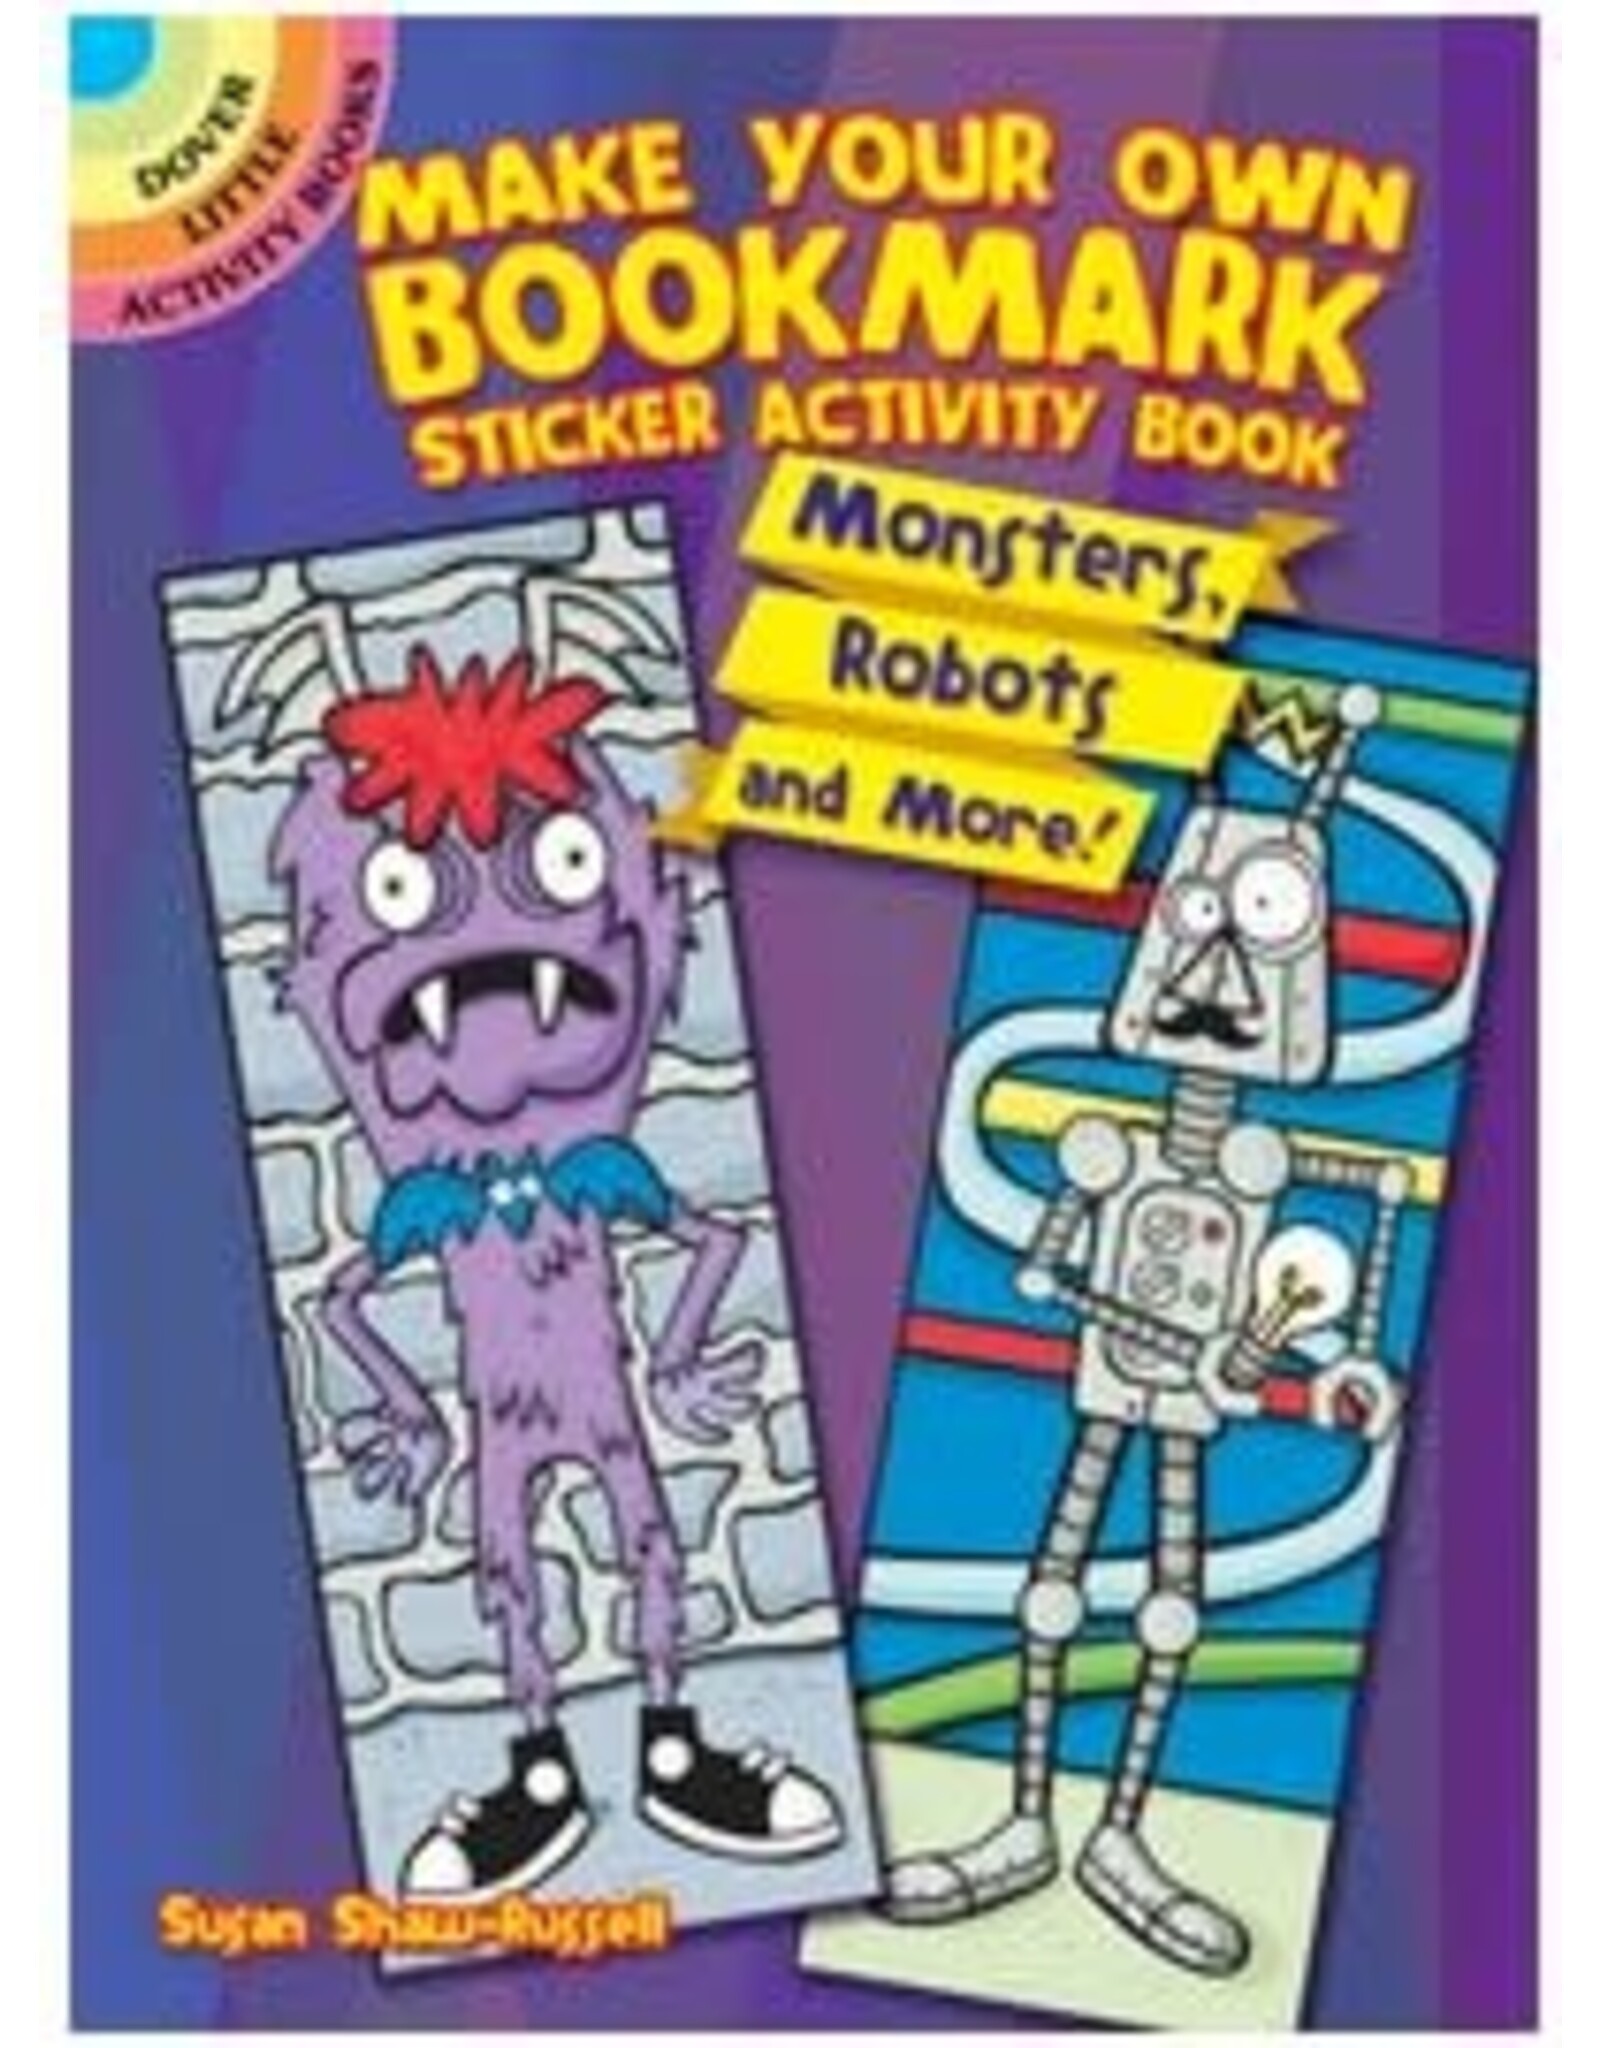 Dover Publications Make Your Own Bookmark Sticker Activity Book: Monsters, Robots and More!